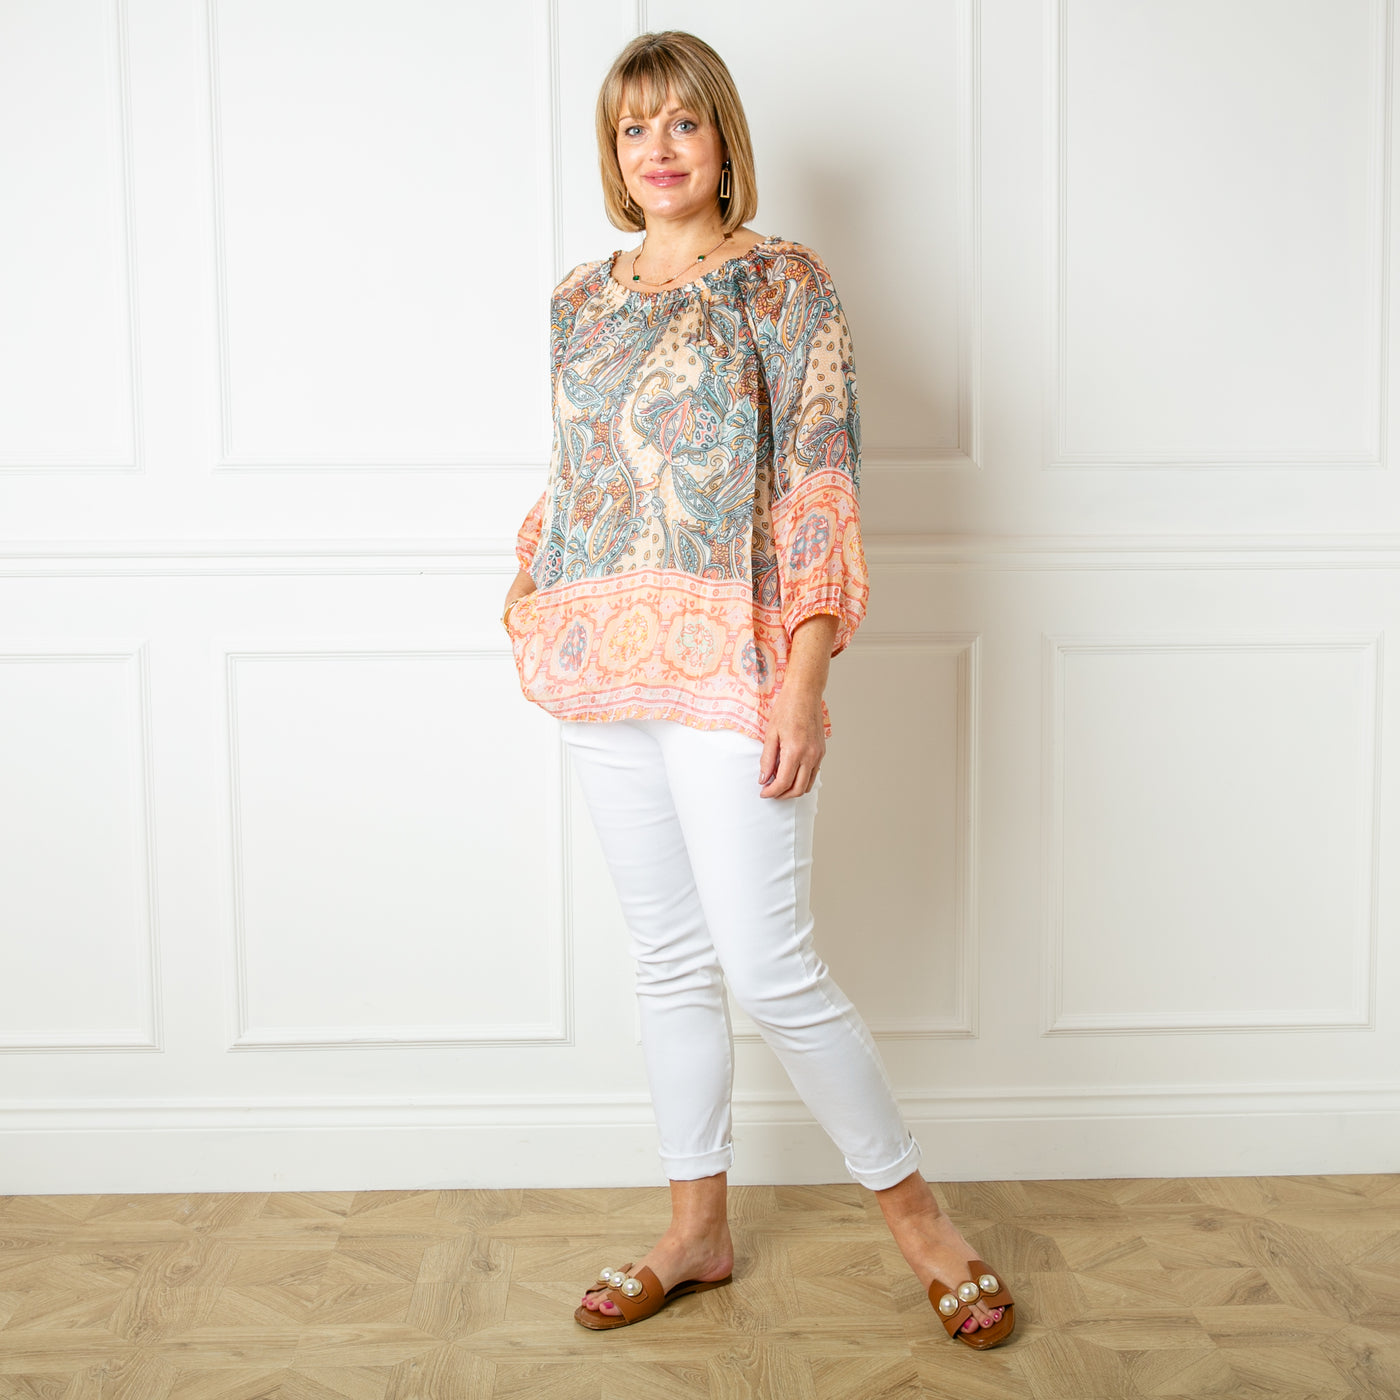 The cream Silk Blend Paisley Top in a beautiful, intrciate paisley print with a stretchy lining underneath